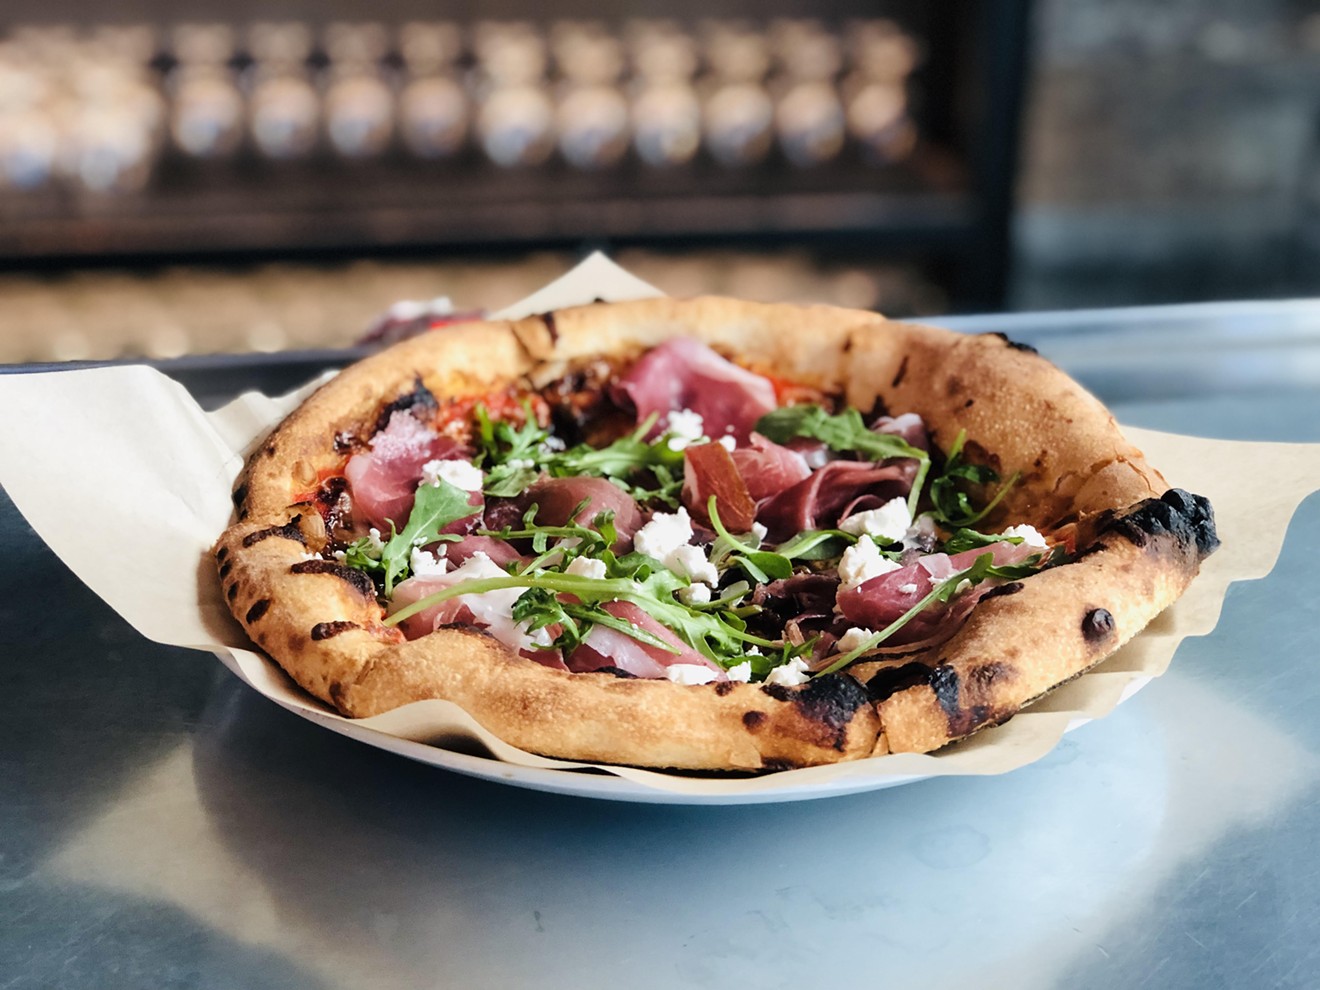 Pedal Haus is adding vegan and gluten-free menu items, including the prosciutto and goat cheese pizza.